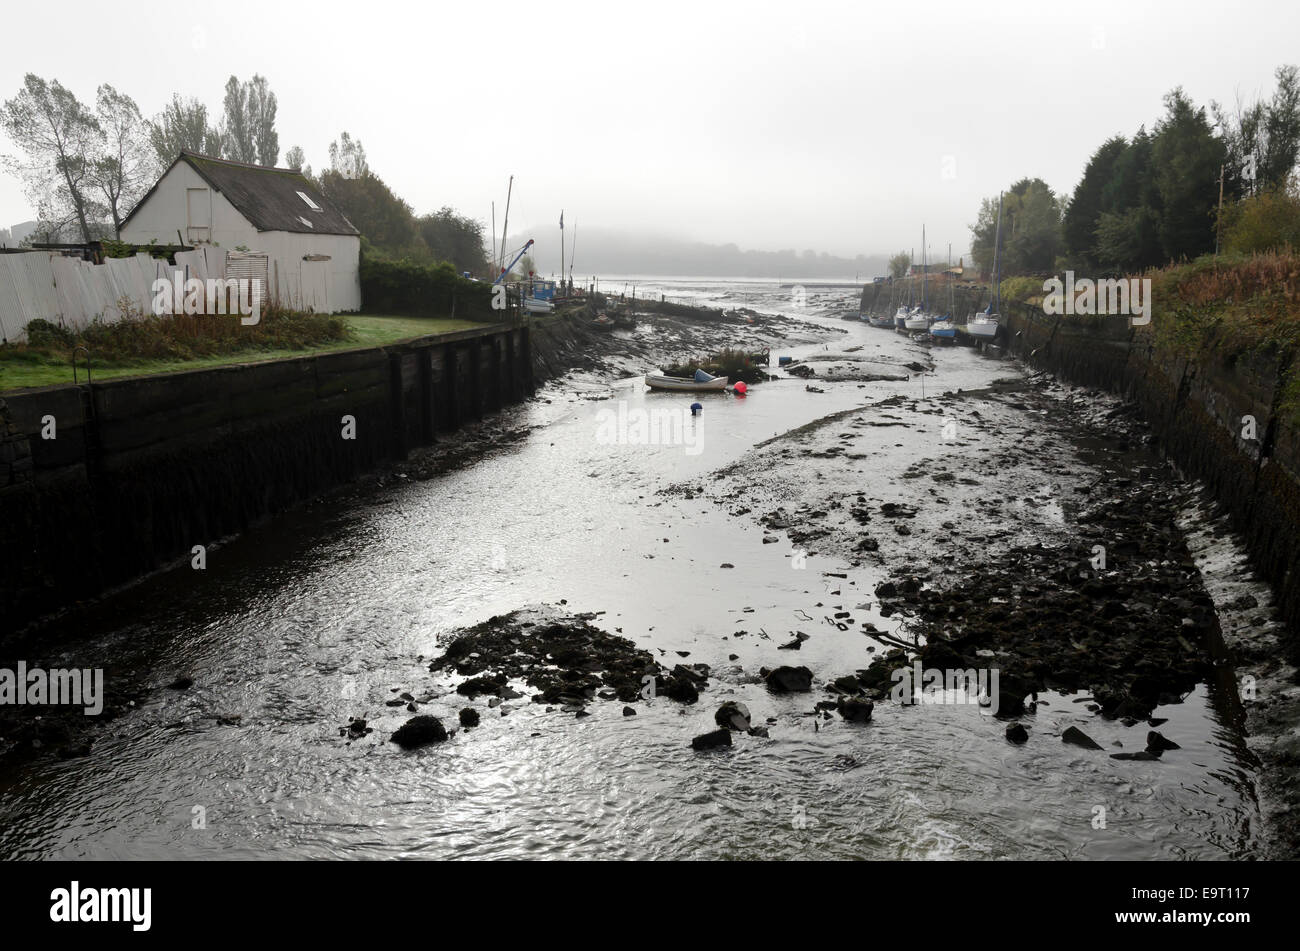 The old harbour in Inverkeithing, Fife, Scotland with a misty Firth of Forth beyond. Stock Photo